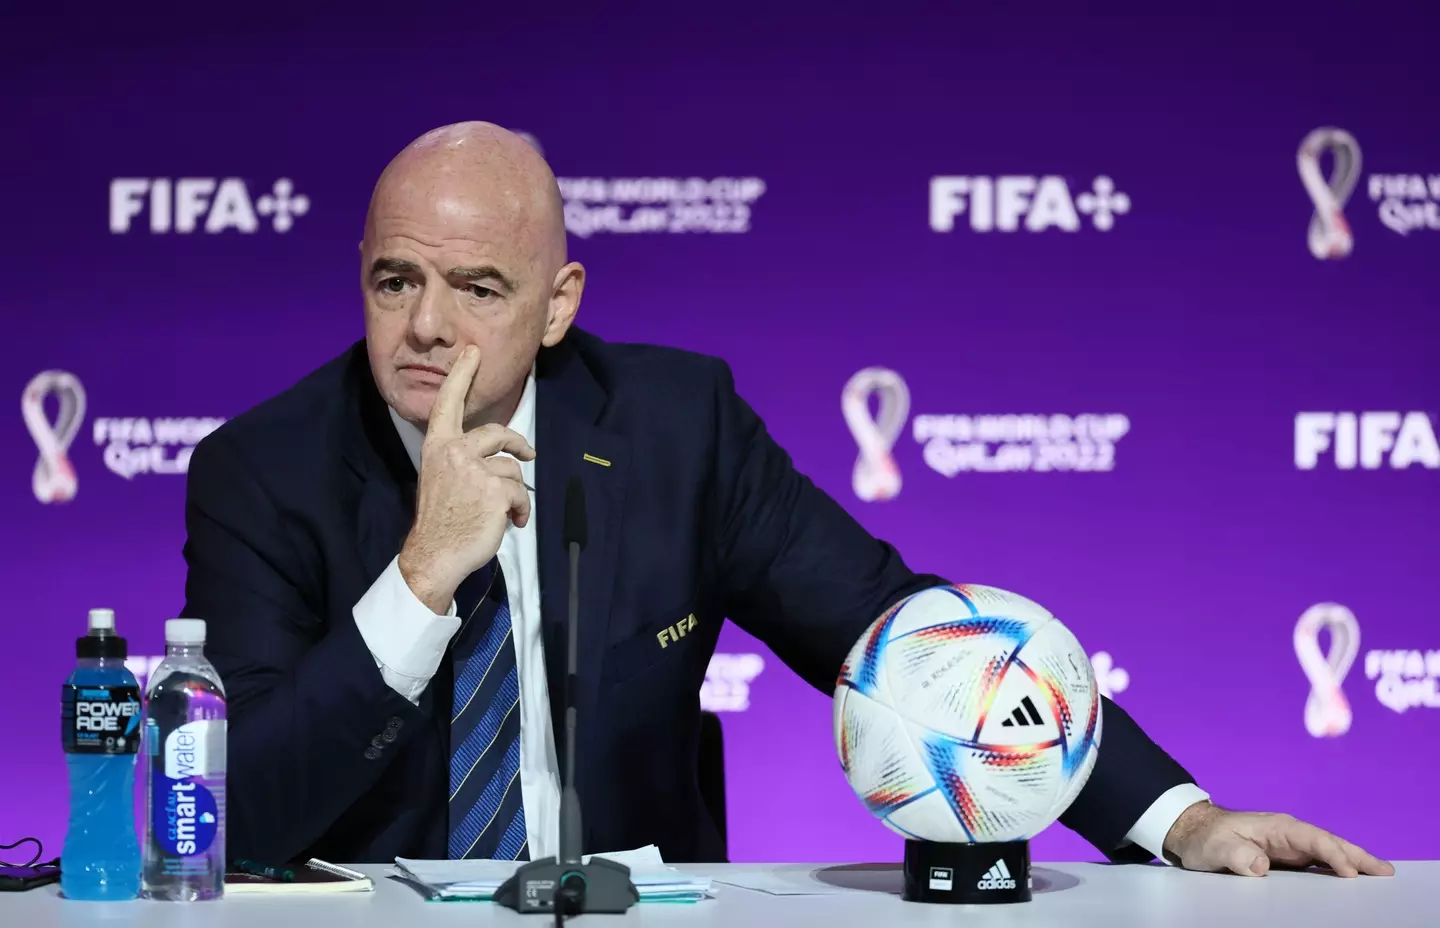 Infantino during a media brief last week. (Image